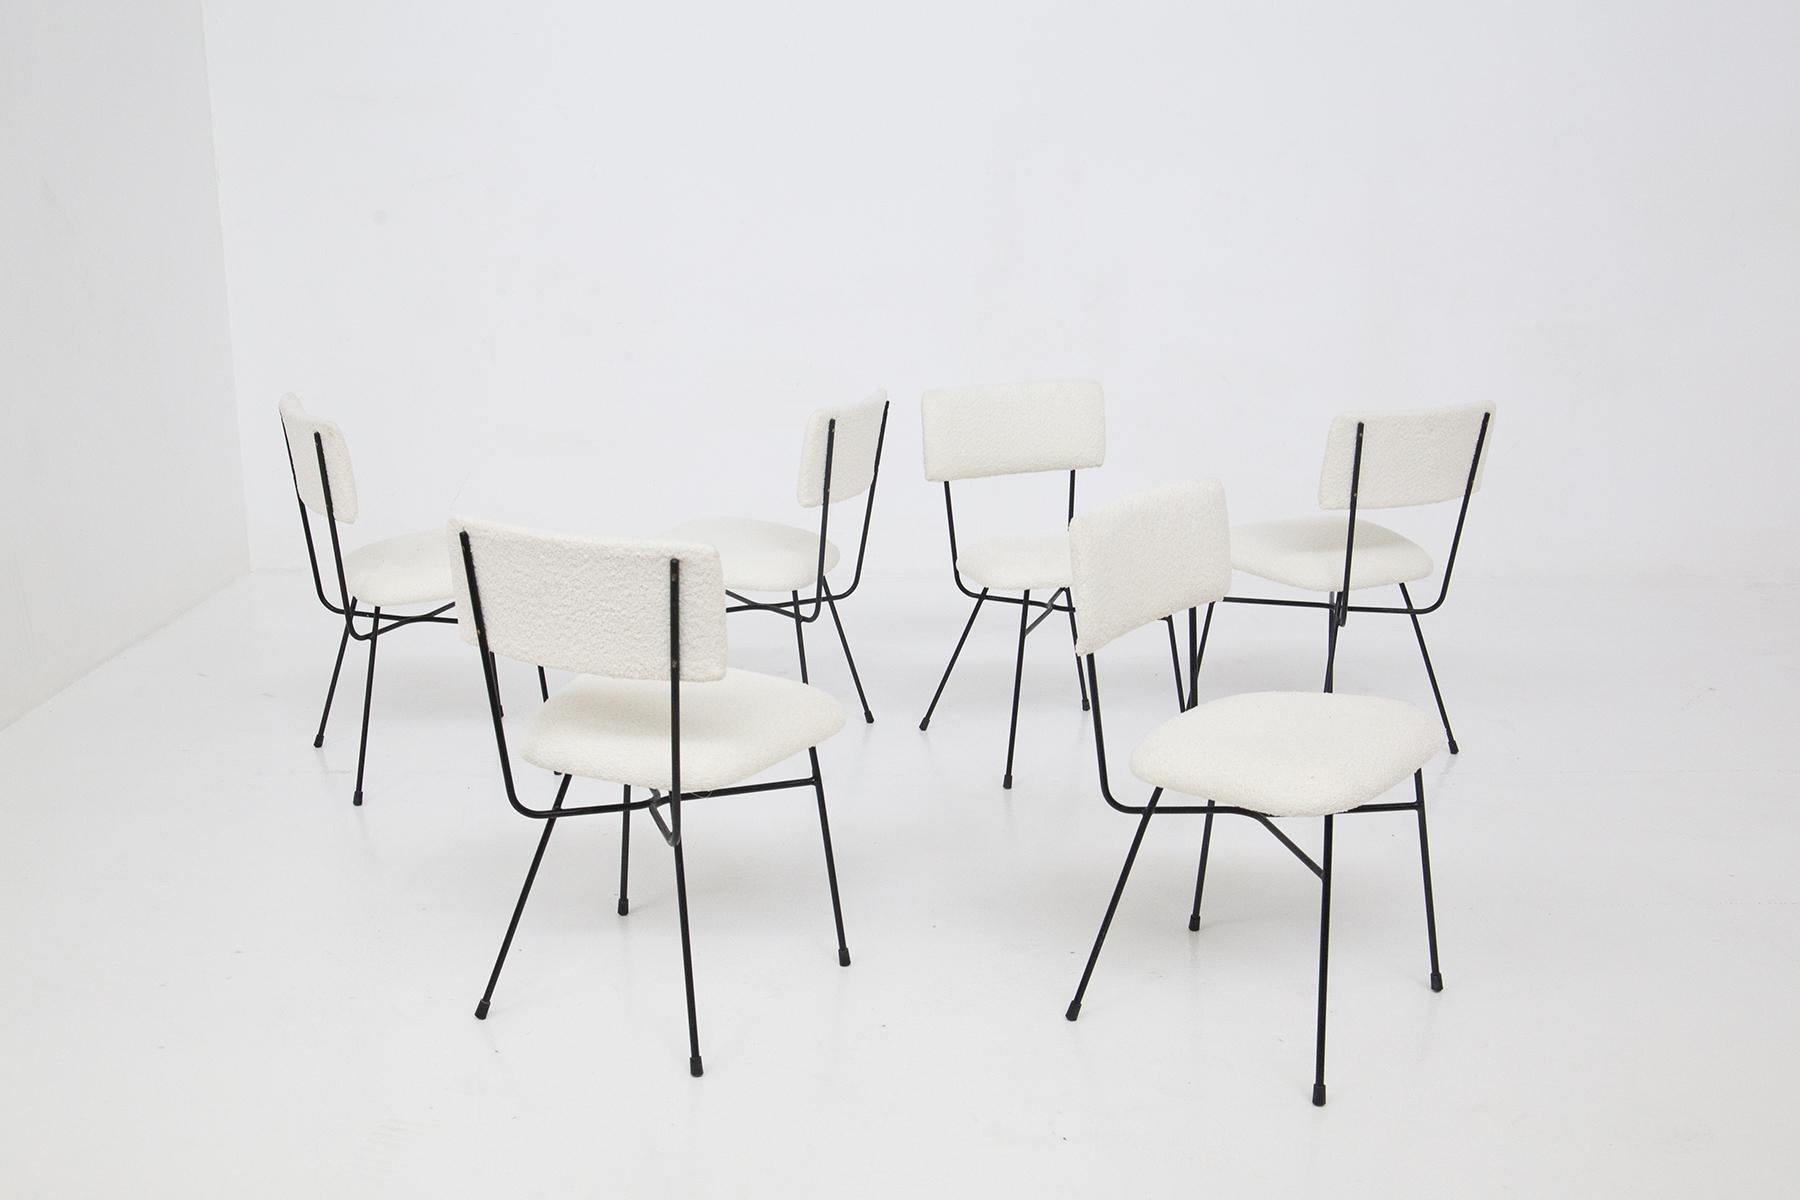 Important set of vintage iron and bouclé chairs designed by BBPR studio in the 1950s, fine Italian manufacture.
The chairs are made with a black iron frame, very geometric. The supporting structure of the back extends to below the seat of the chair